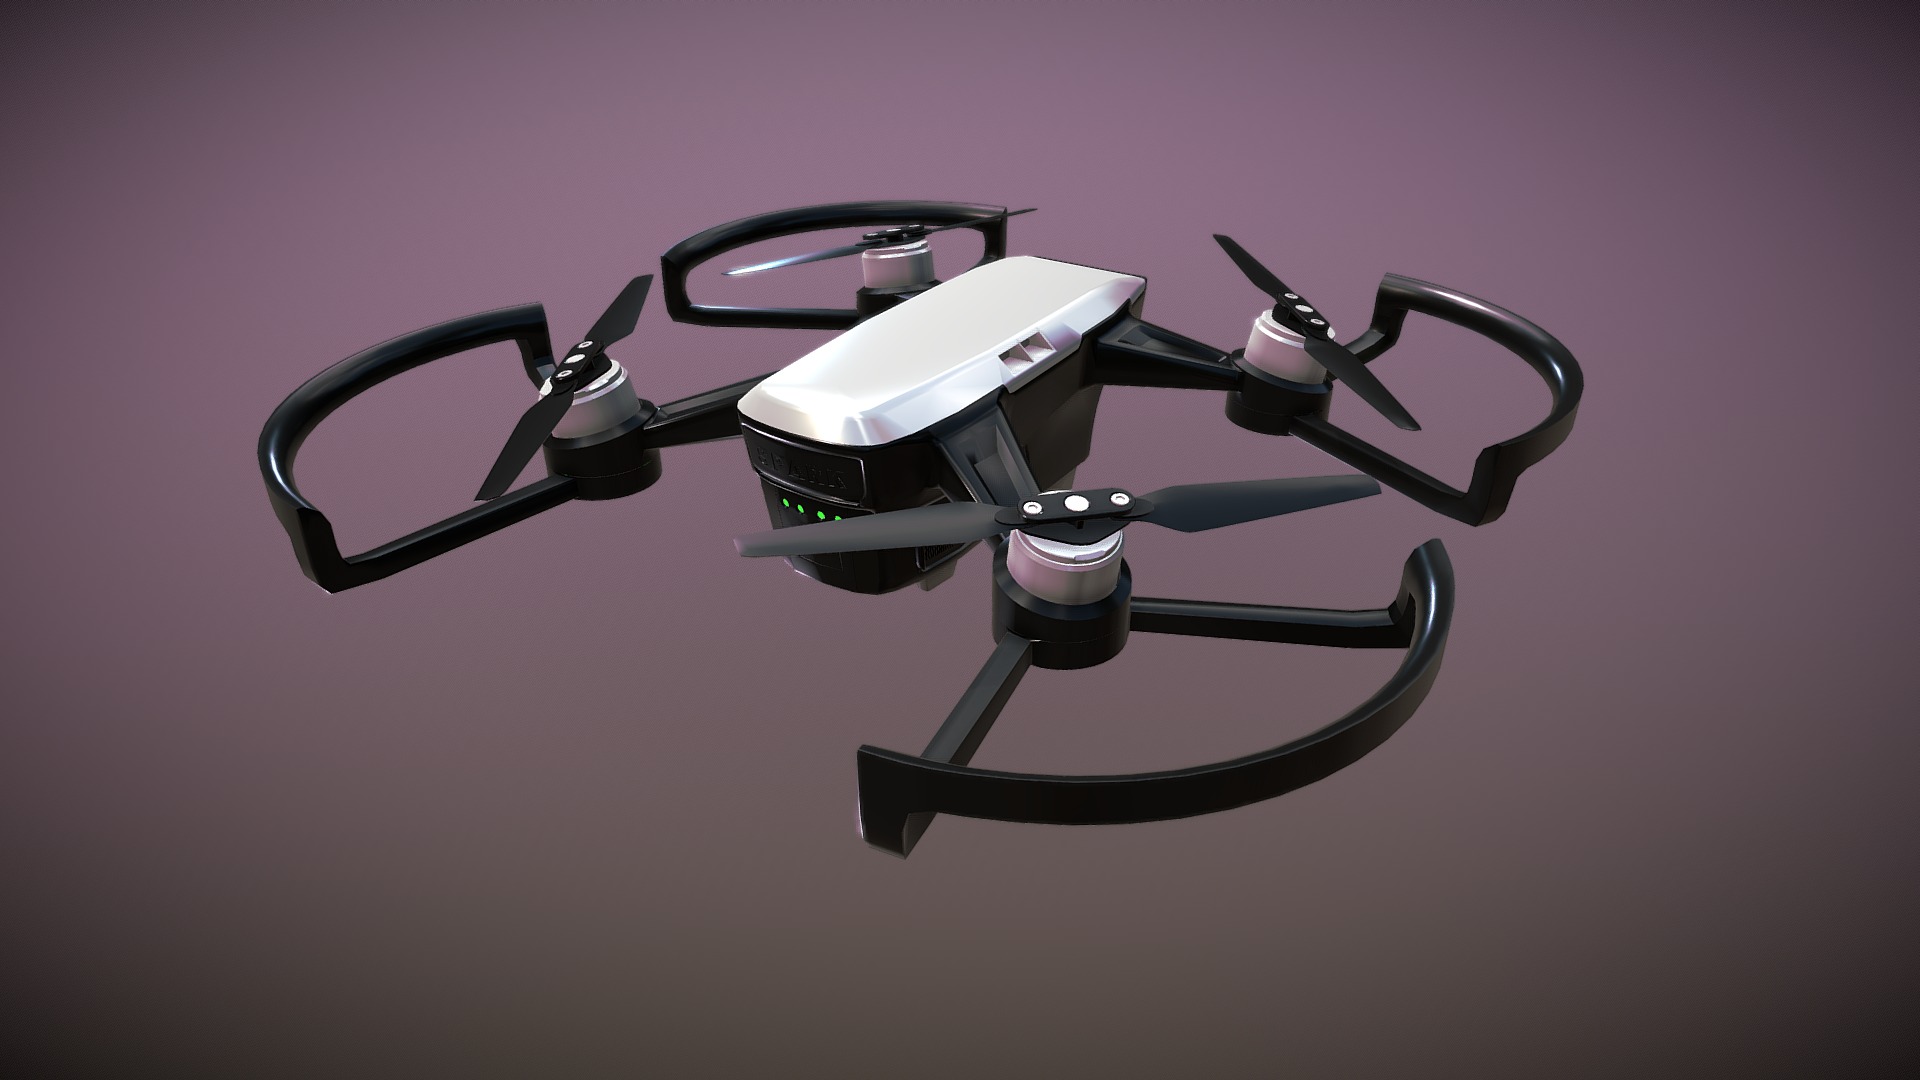 3D model DJI Spark drone Low poly Animated - This is a 3D model of the DJI Spark drone Low poly Animated. The 3D model is about a drone with a red background.